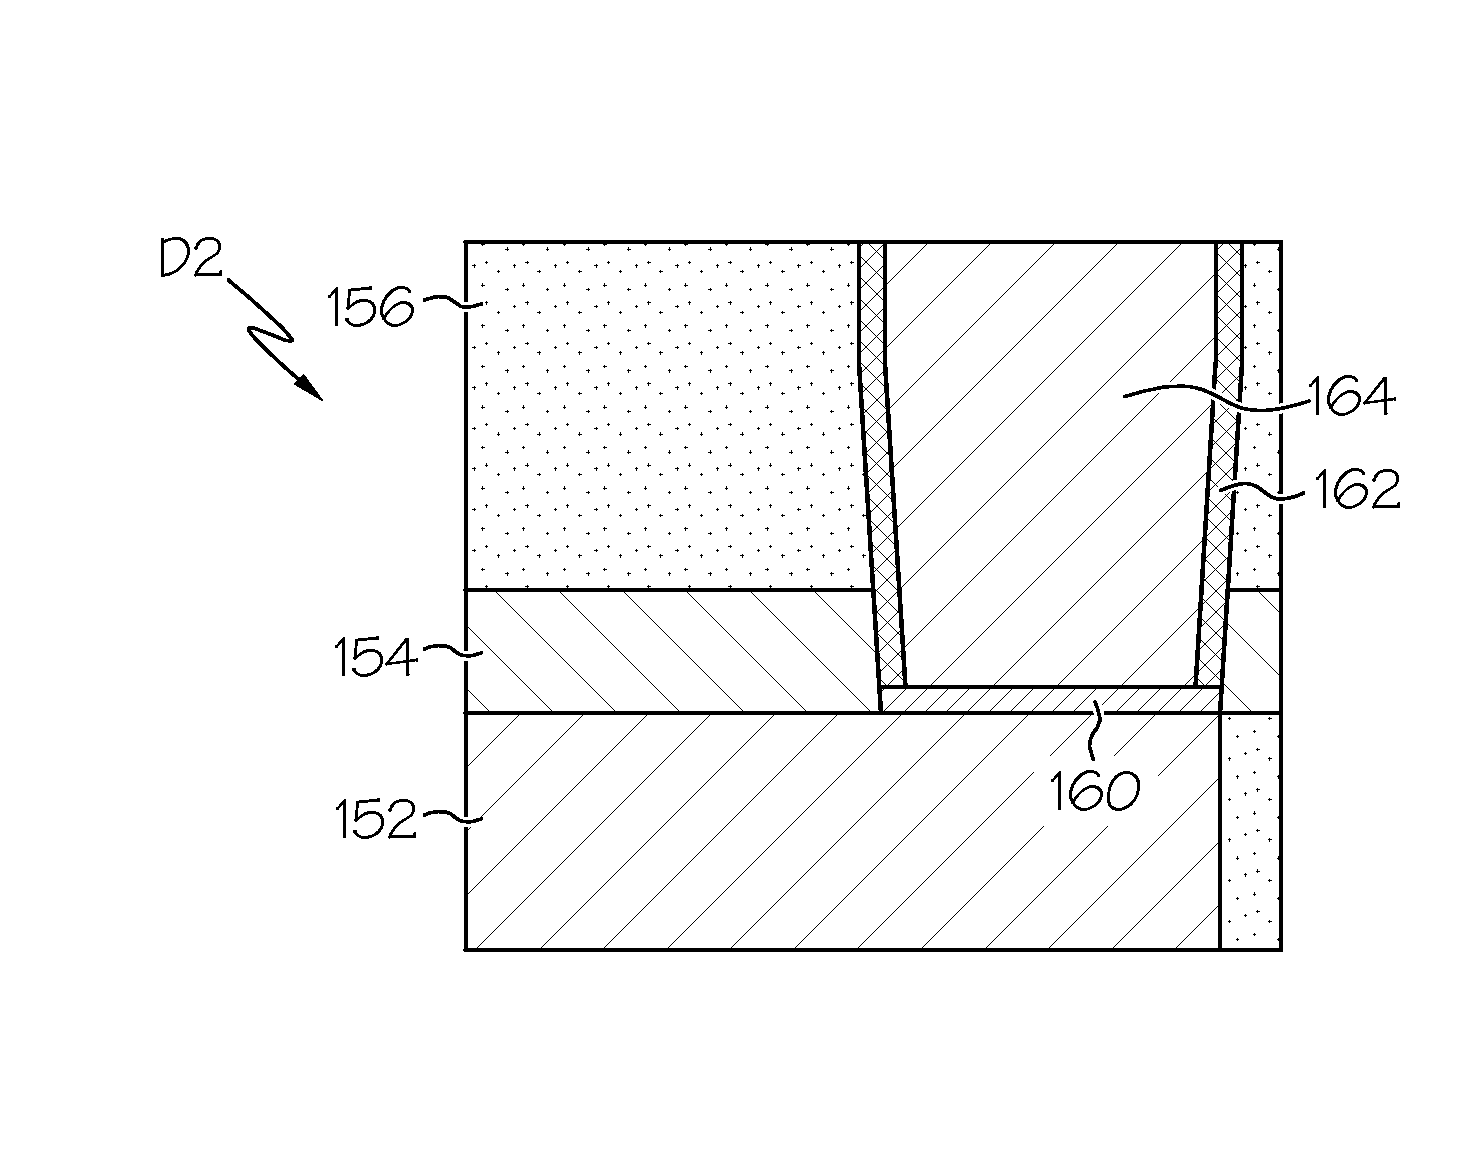 Semiconductor device having a self-forming barrier layer at via bottom